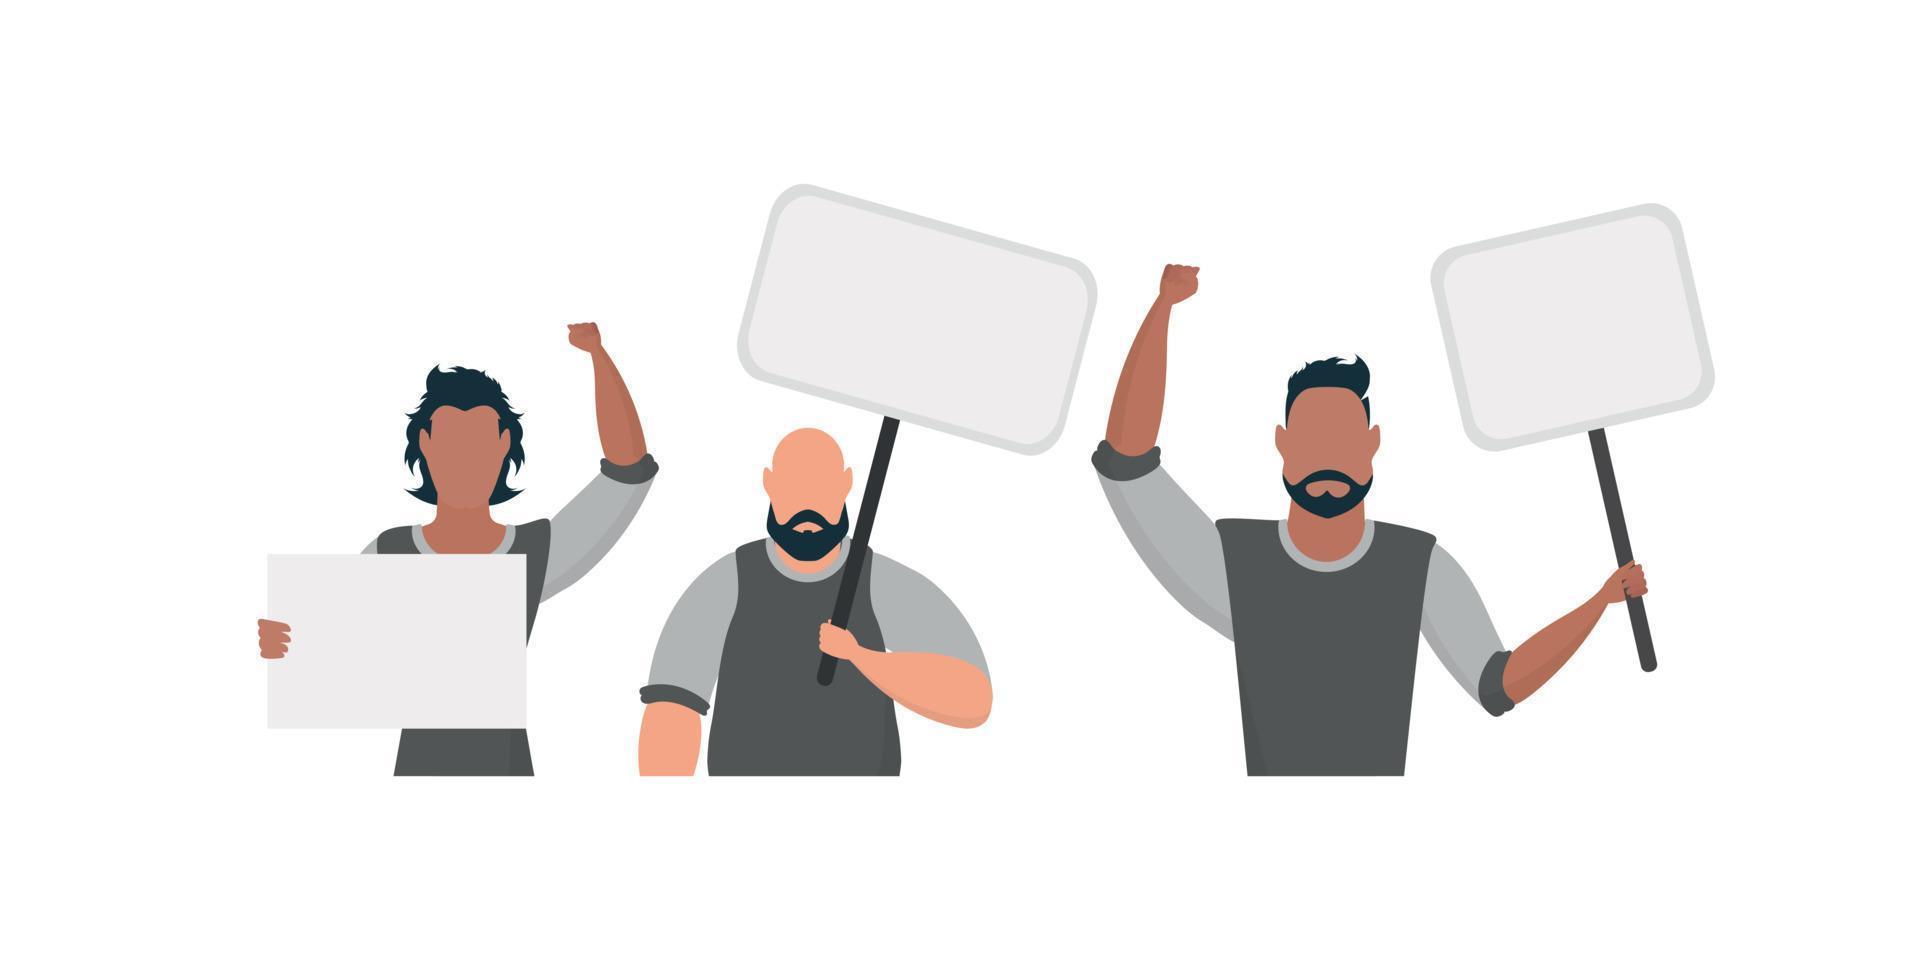 A guy with an empty banner in his hands. With space for your text. Rally or protest concept. Cartoon style. vector